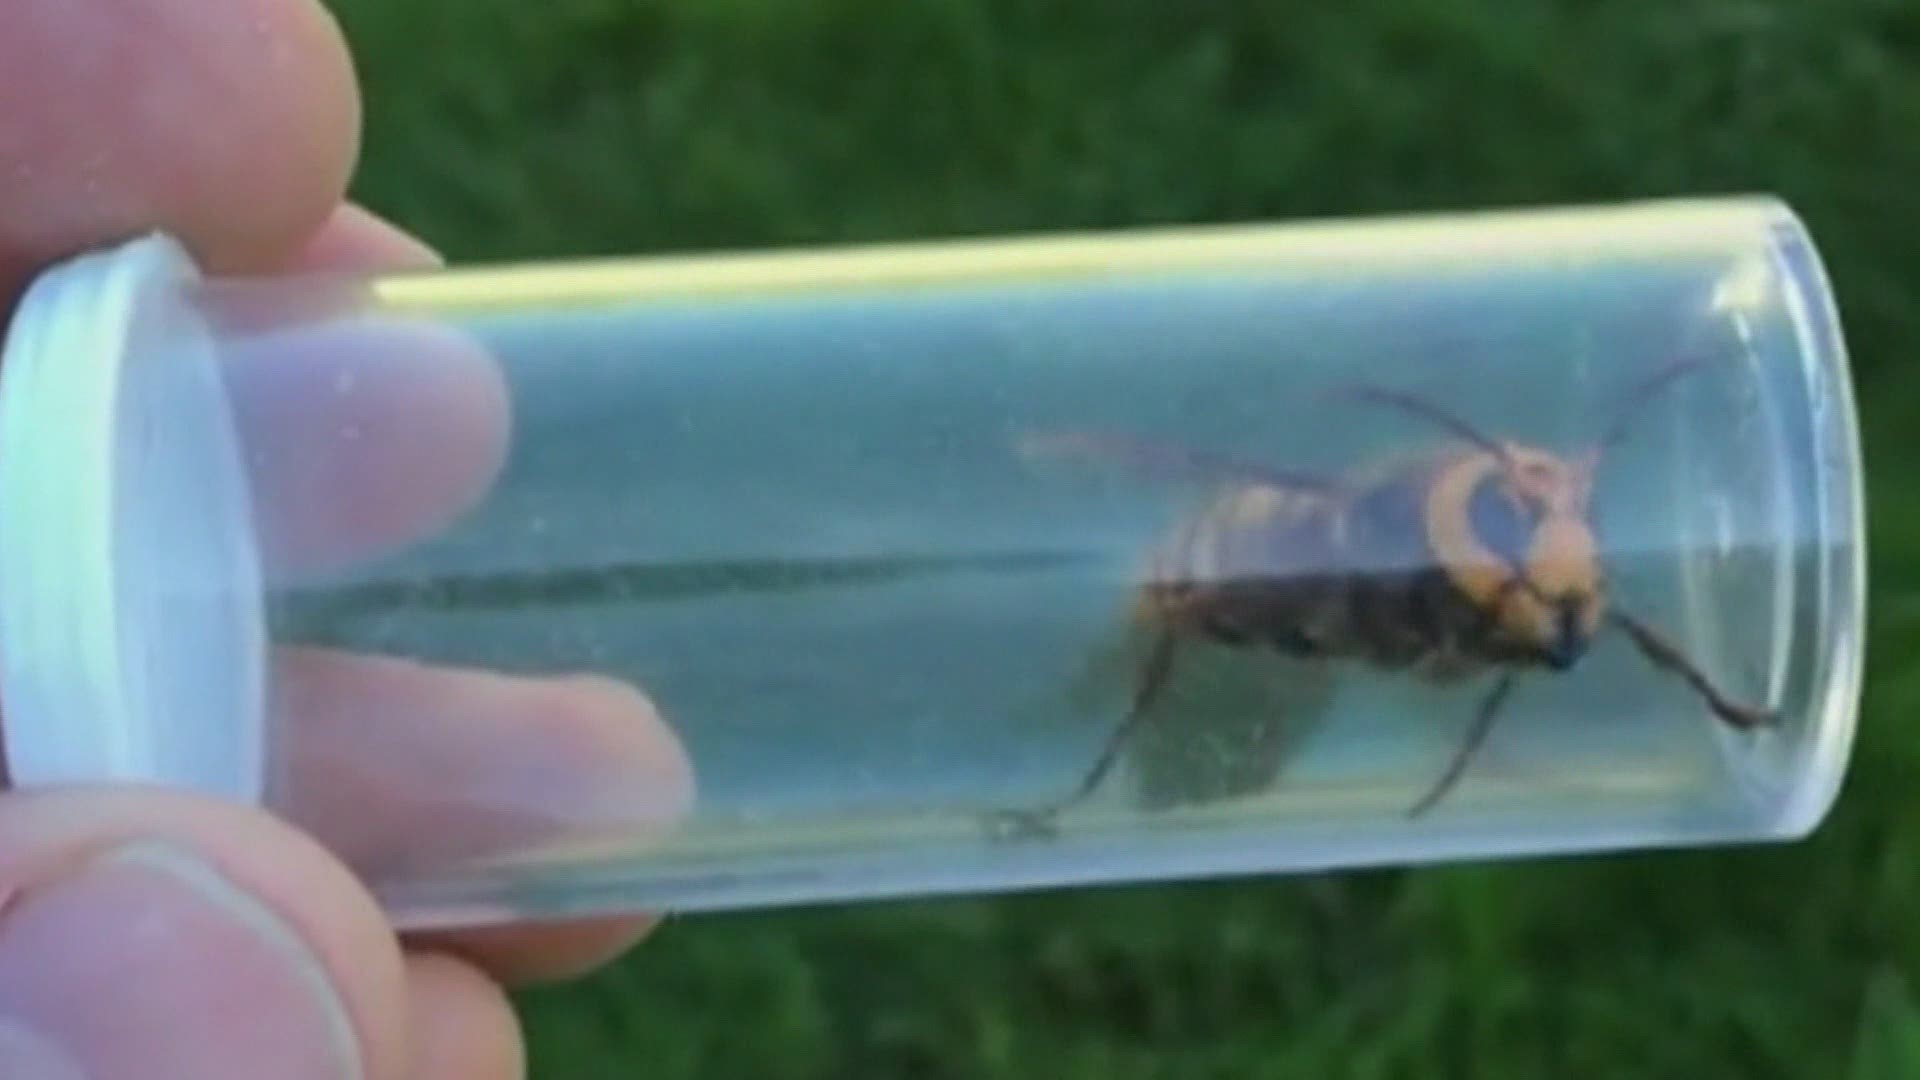 The infamous Asian giant hornets still pose a massive threat to the state's honeybee population.